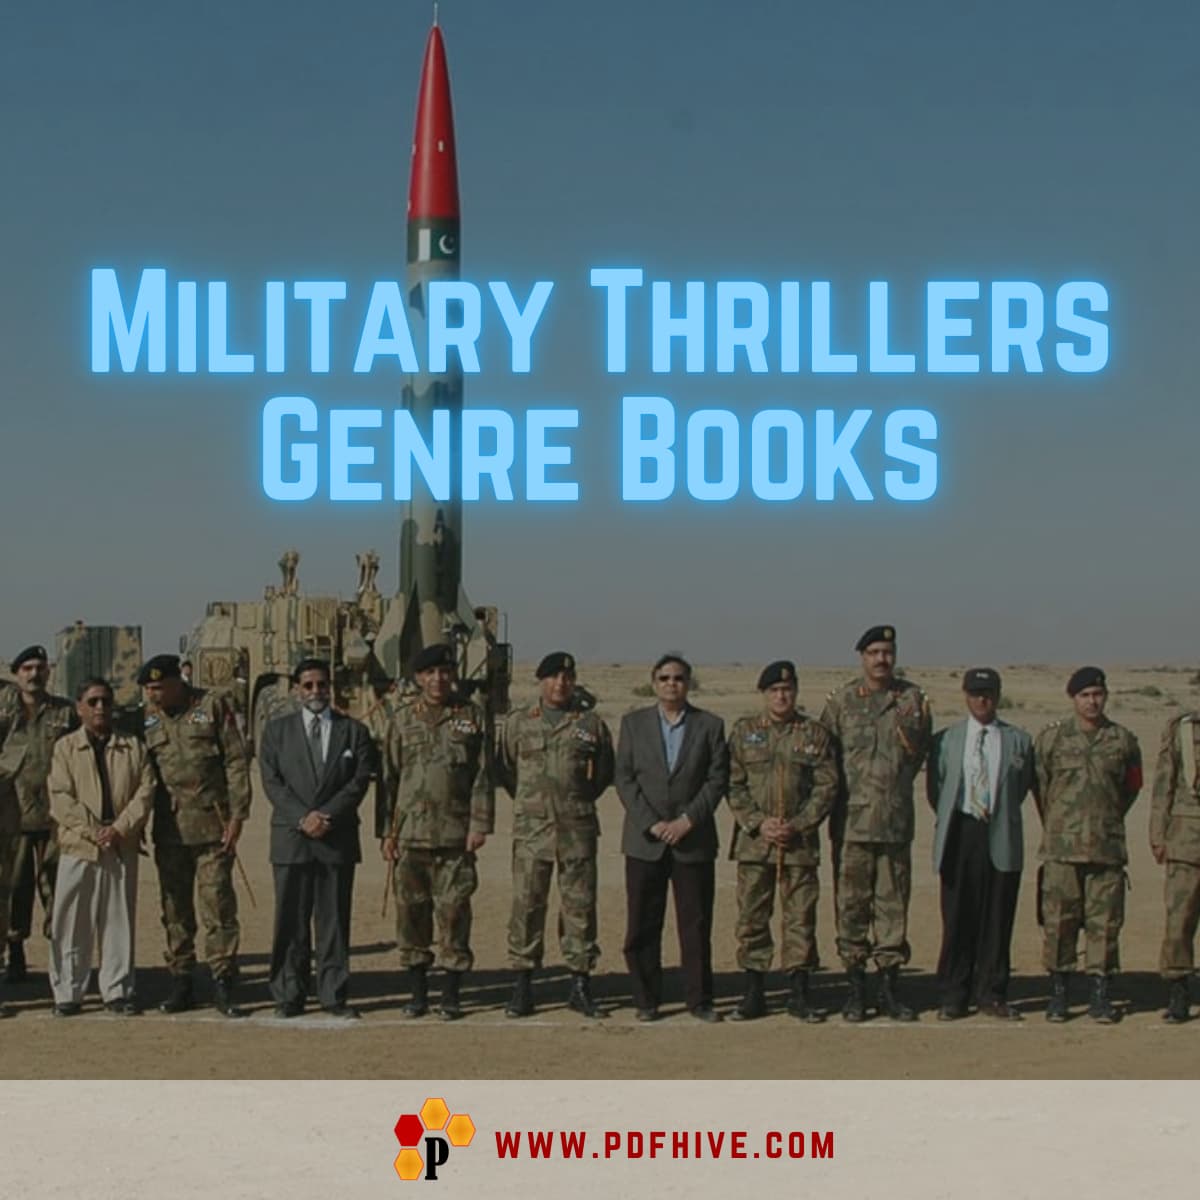 Military Thrillers Genre Books